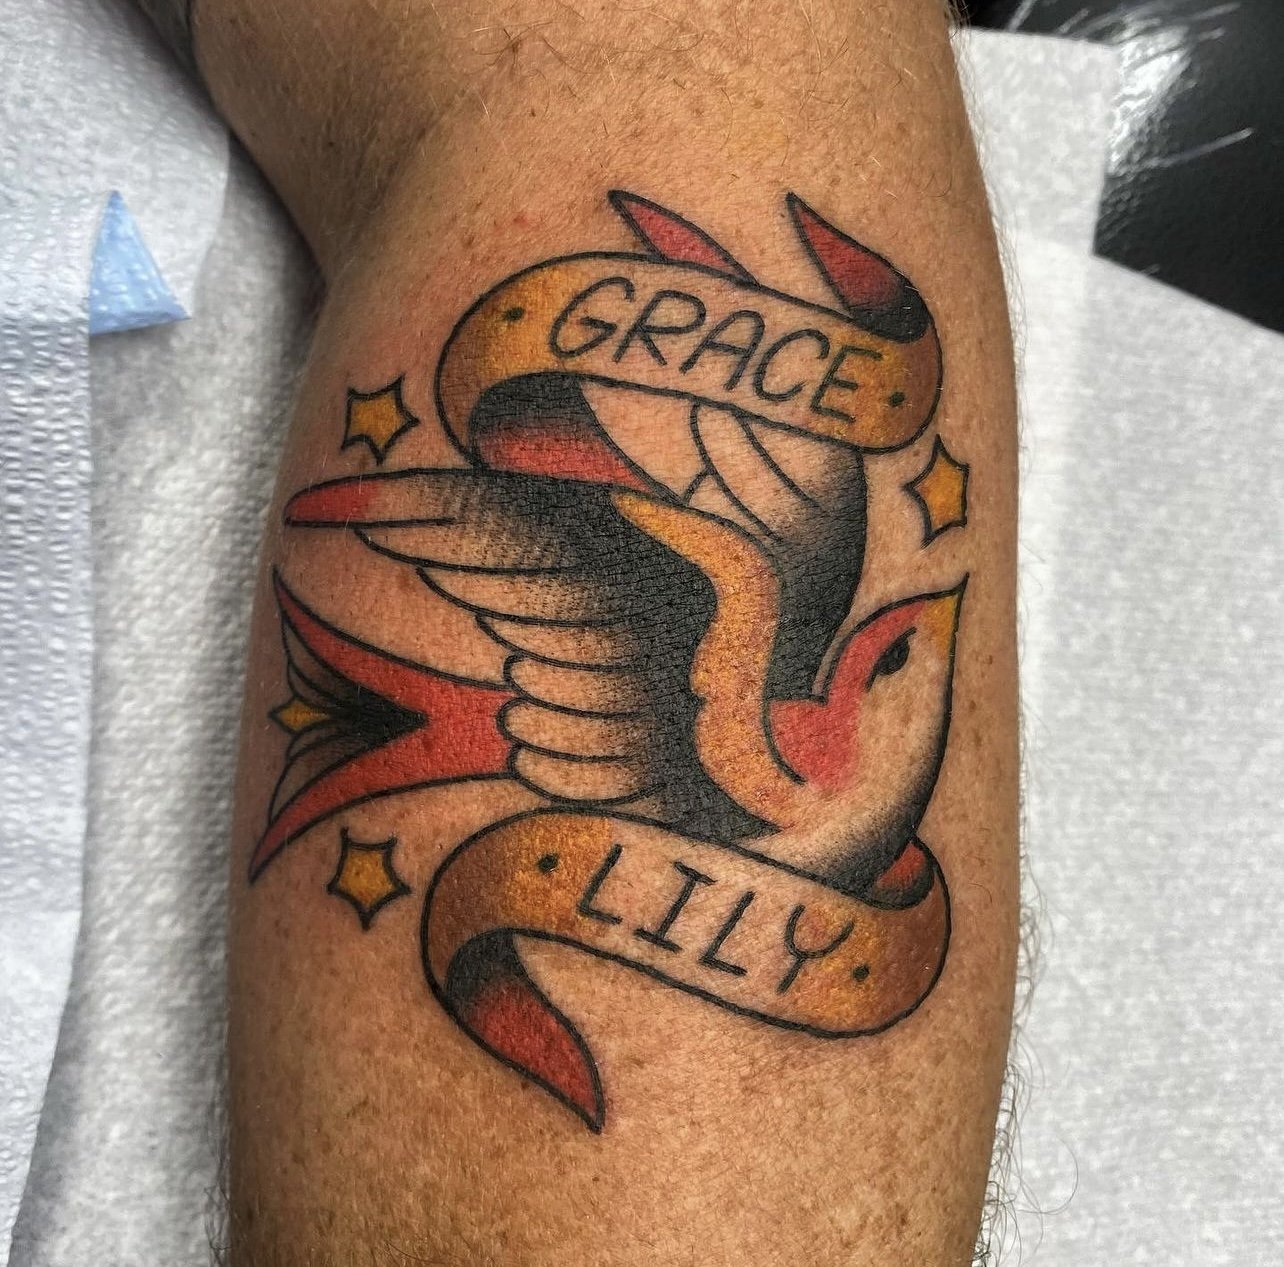 Details more than 145 victory tattoo latest